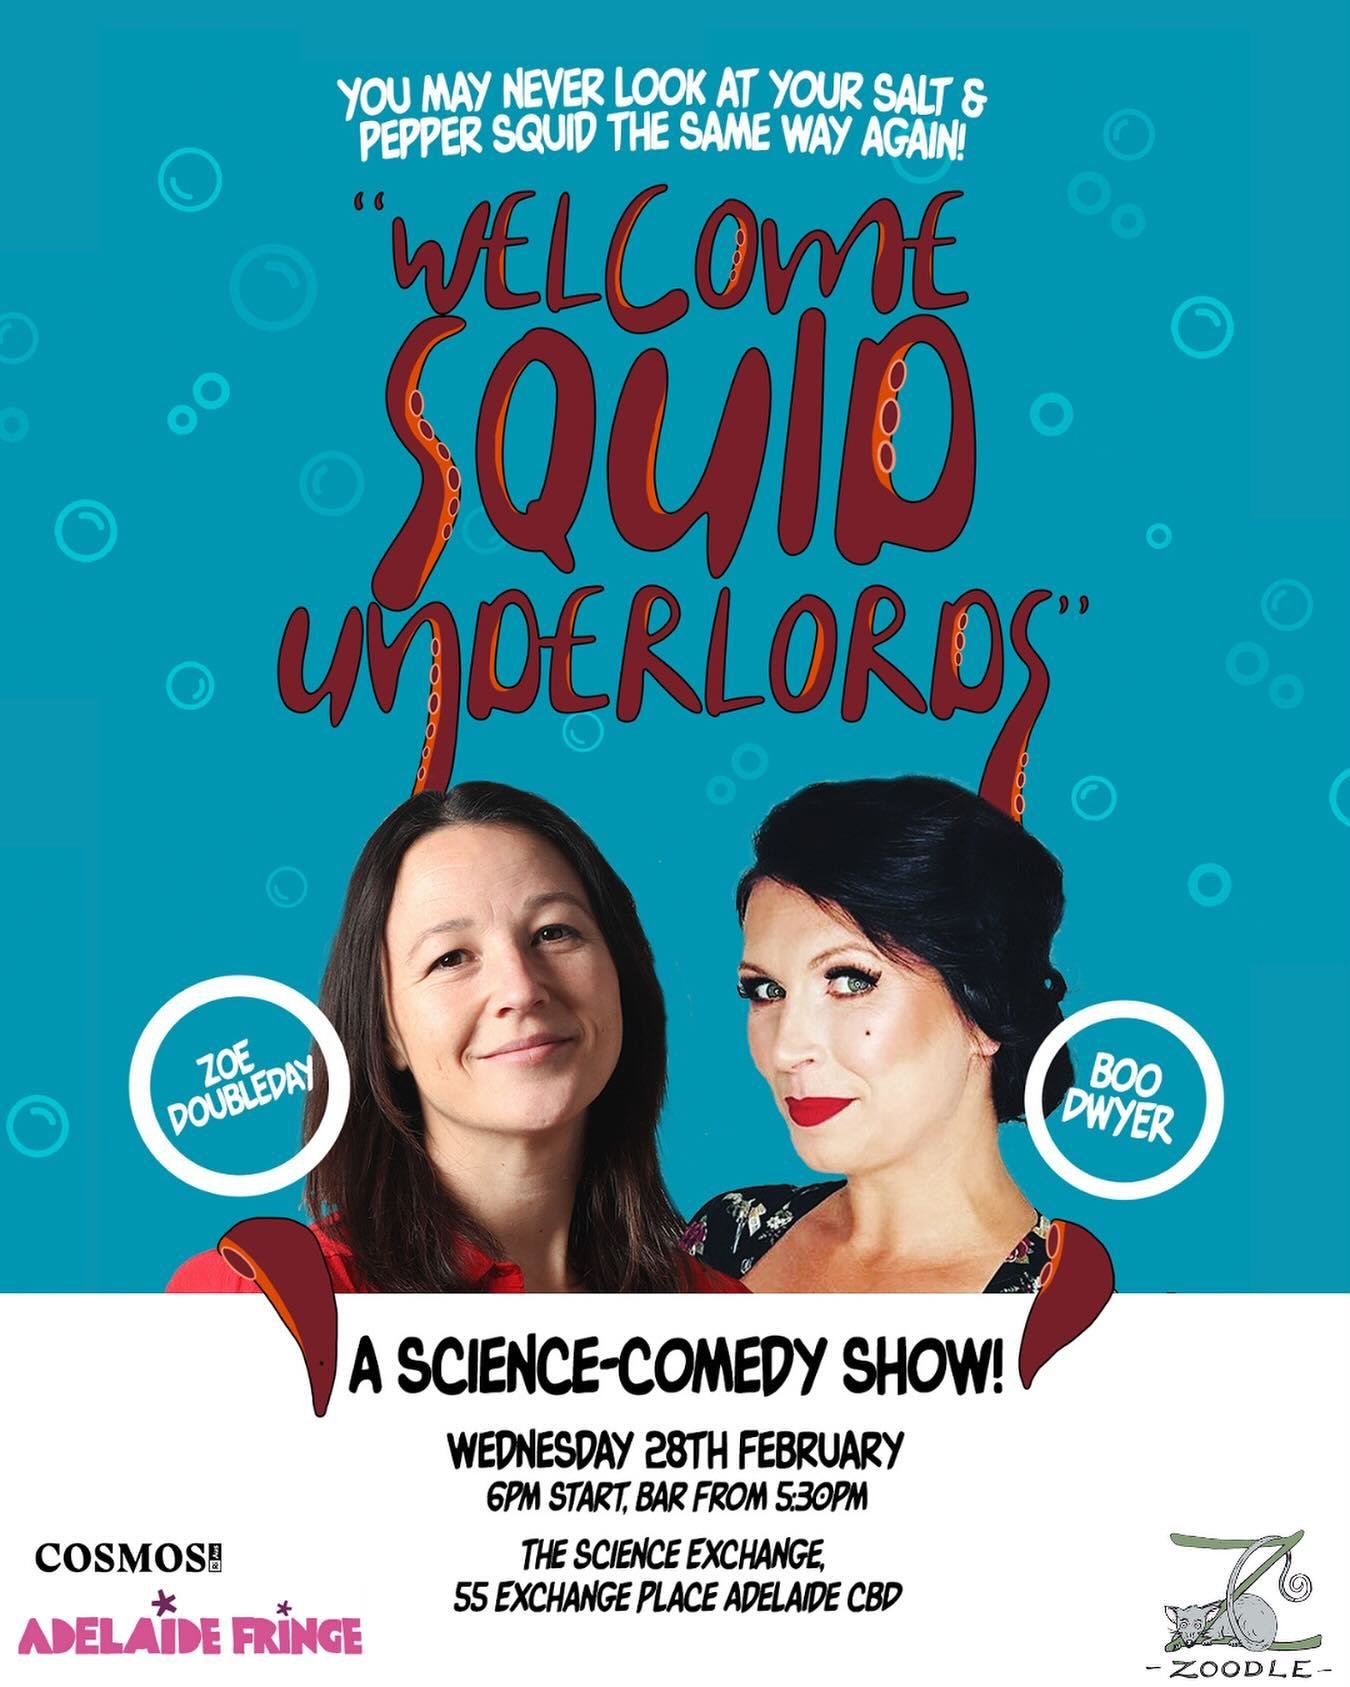 I&rsquo;m going to be an Adelaide Fringe artist and take part in a different type of #scicomm - #sciencecomedy!

Dive into the depths of marine mysteries with me at Zoodle TV&rsquo;s &ldquo;Welcome Squid Underlords&rdquo; during the @adlfringe🎉🔬

C